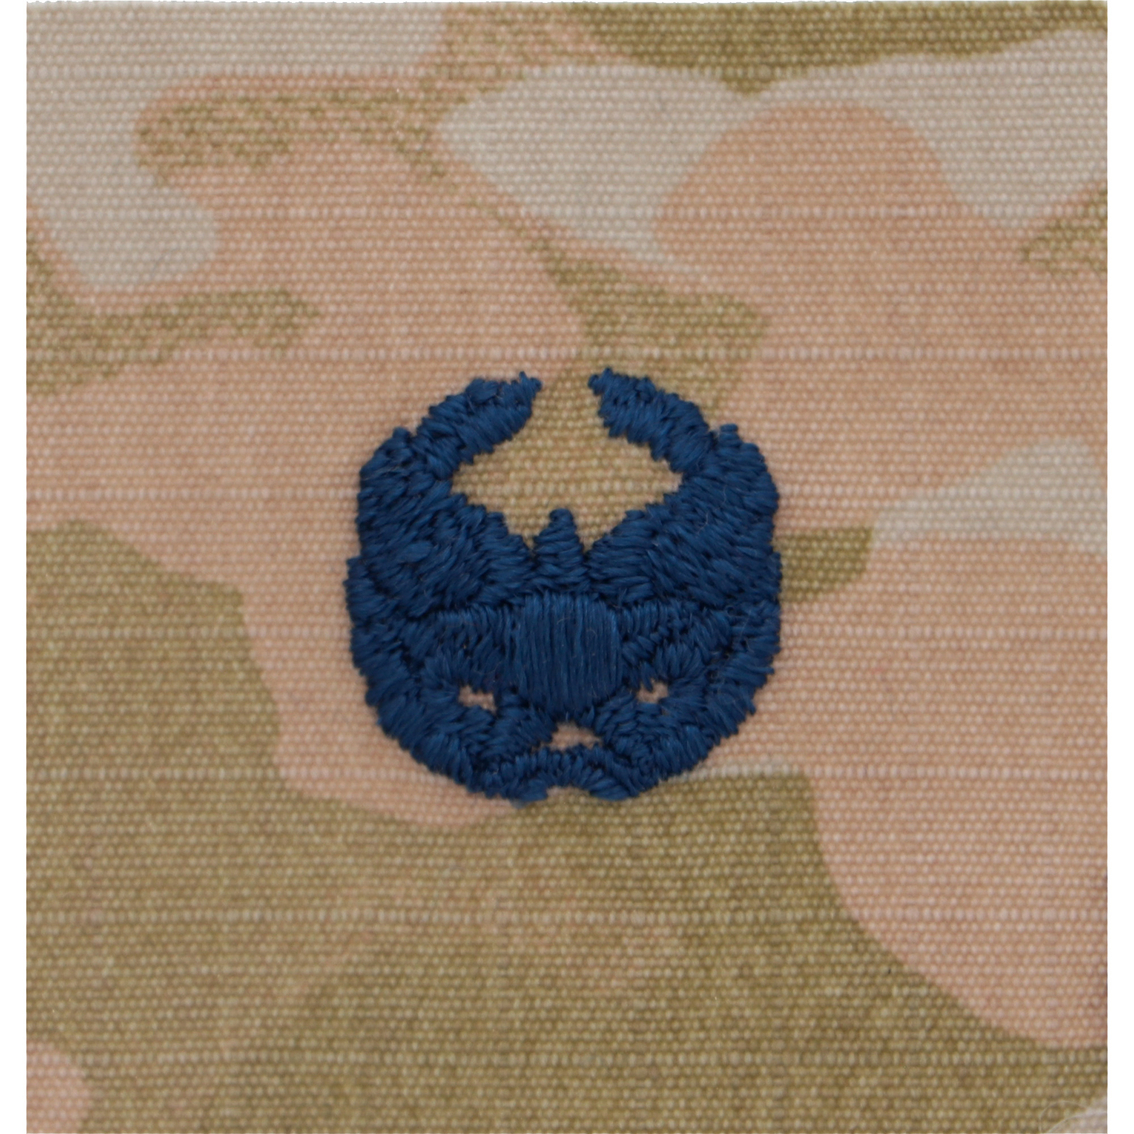 Space Force Embroidered Commander's Badge Sew-On